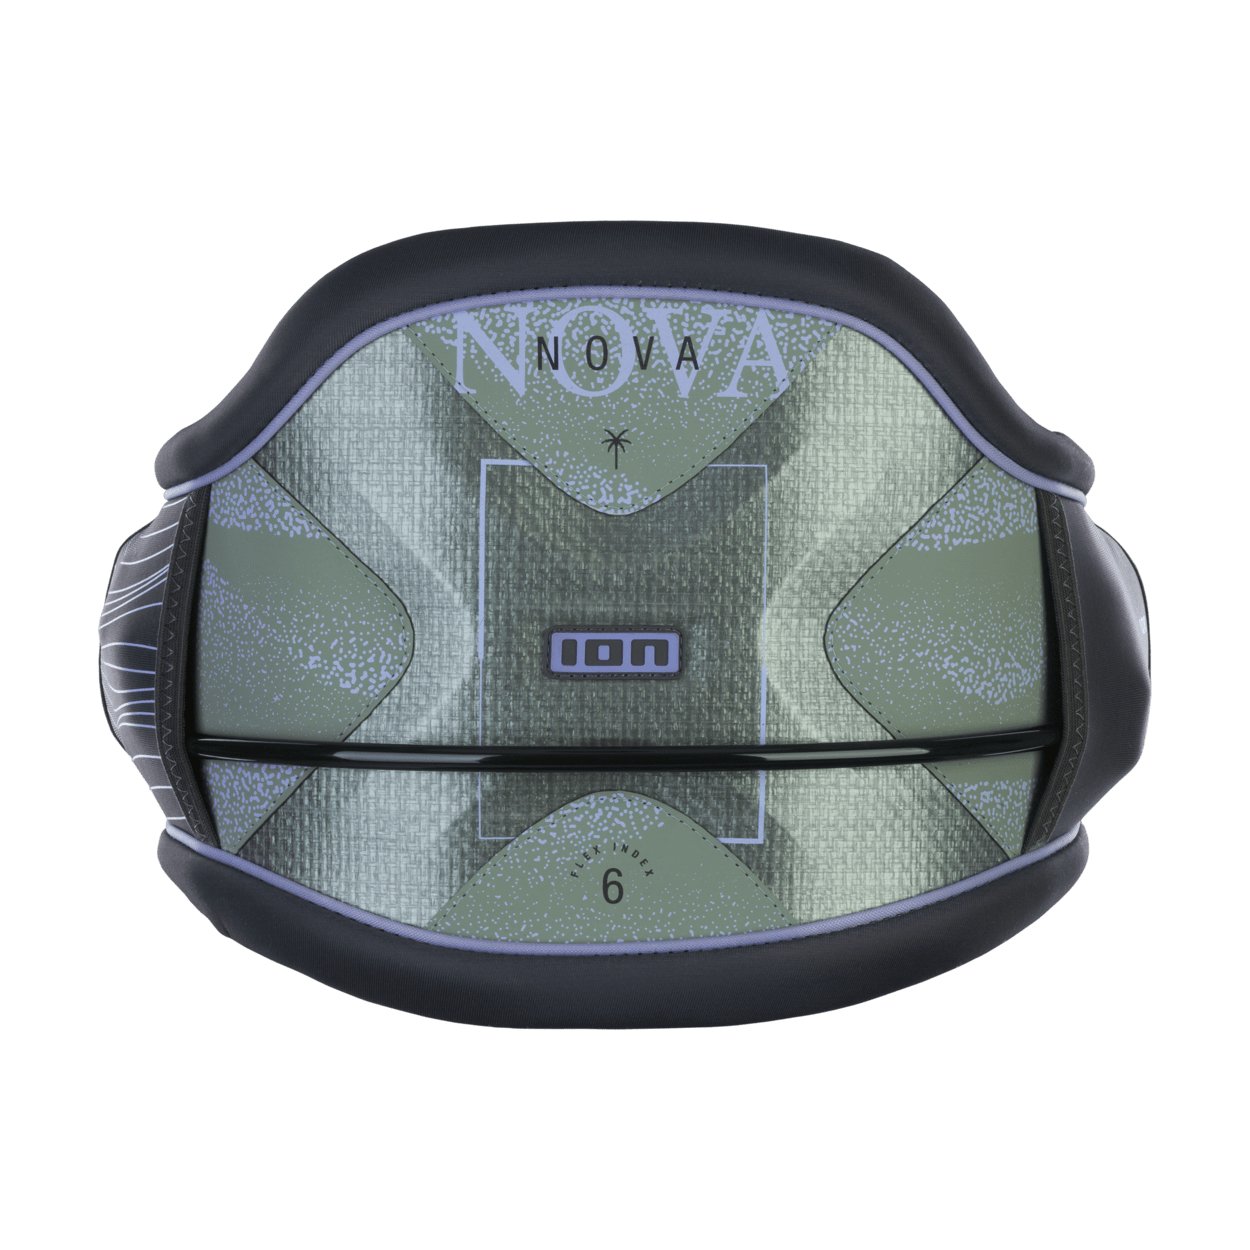 ION Nova 2023 - Worthing Watersports - 9010583122557 - Harness - ION Water